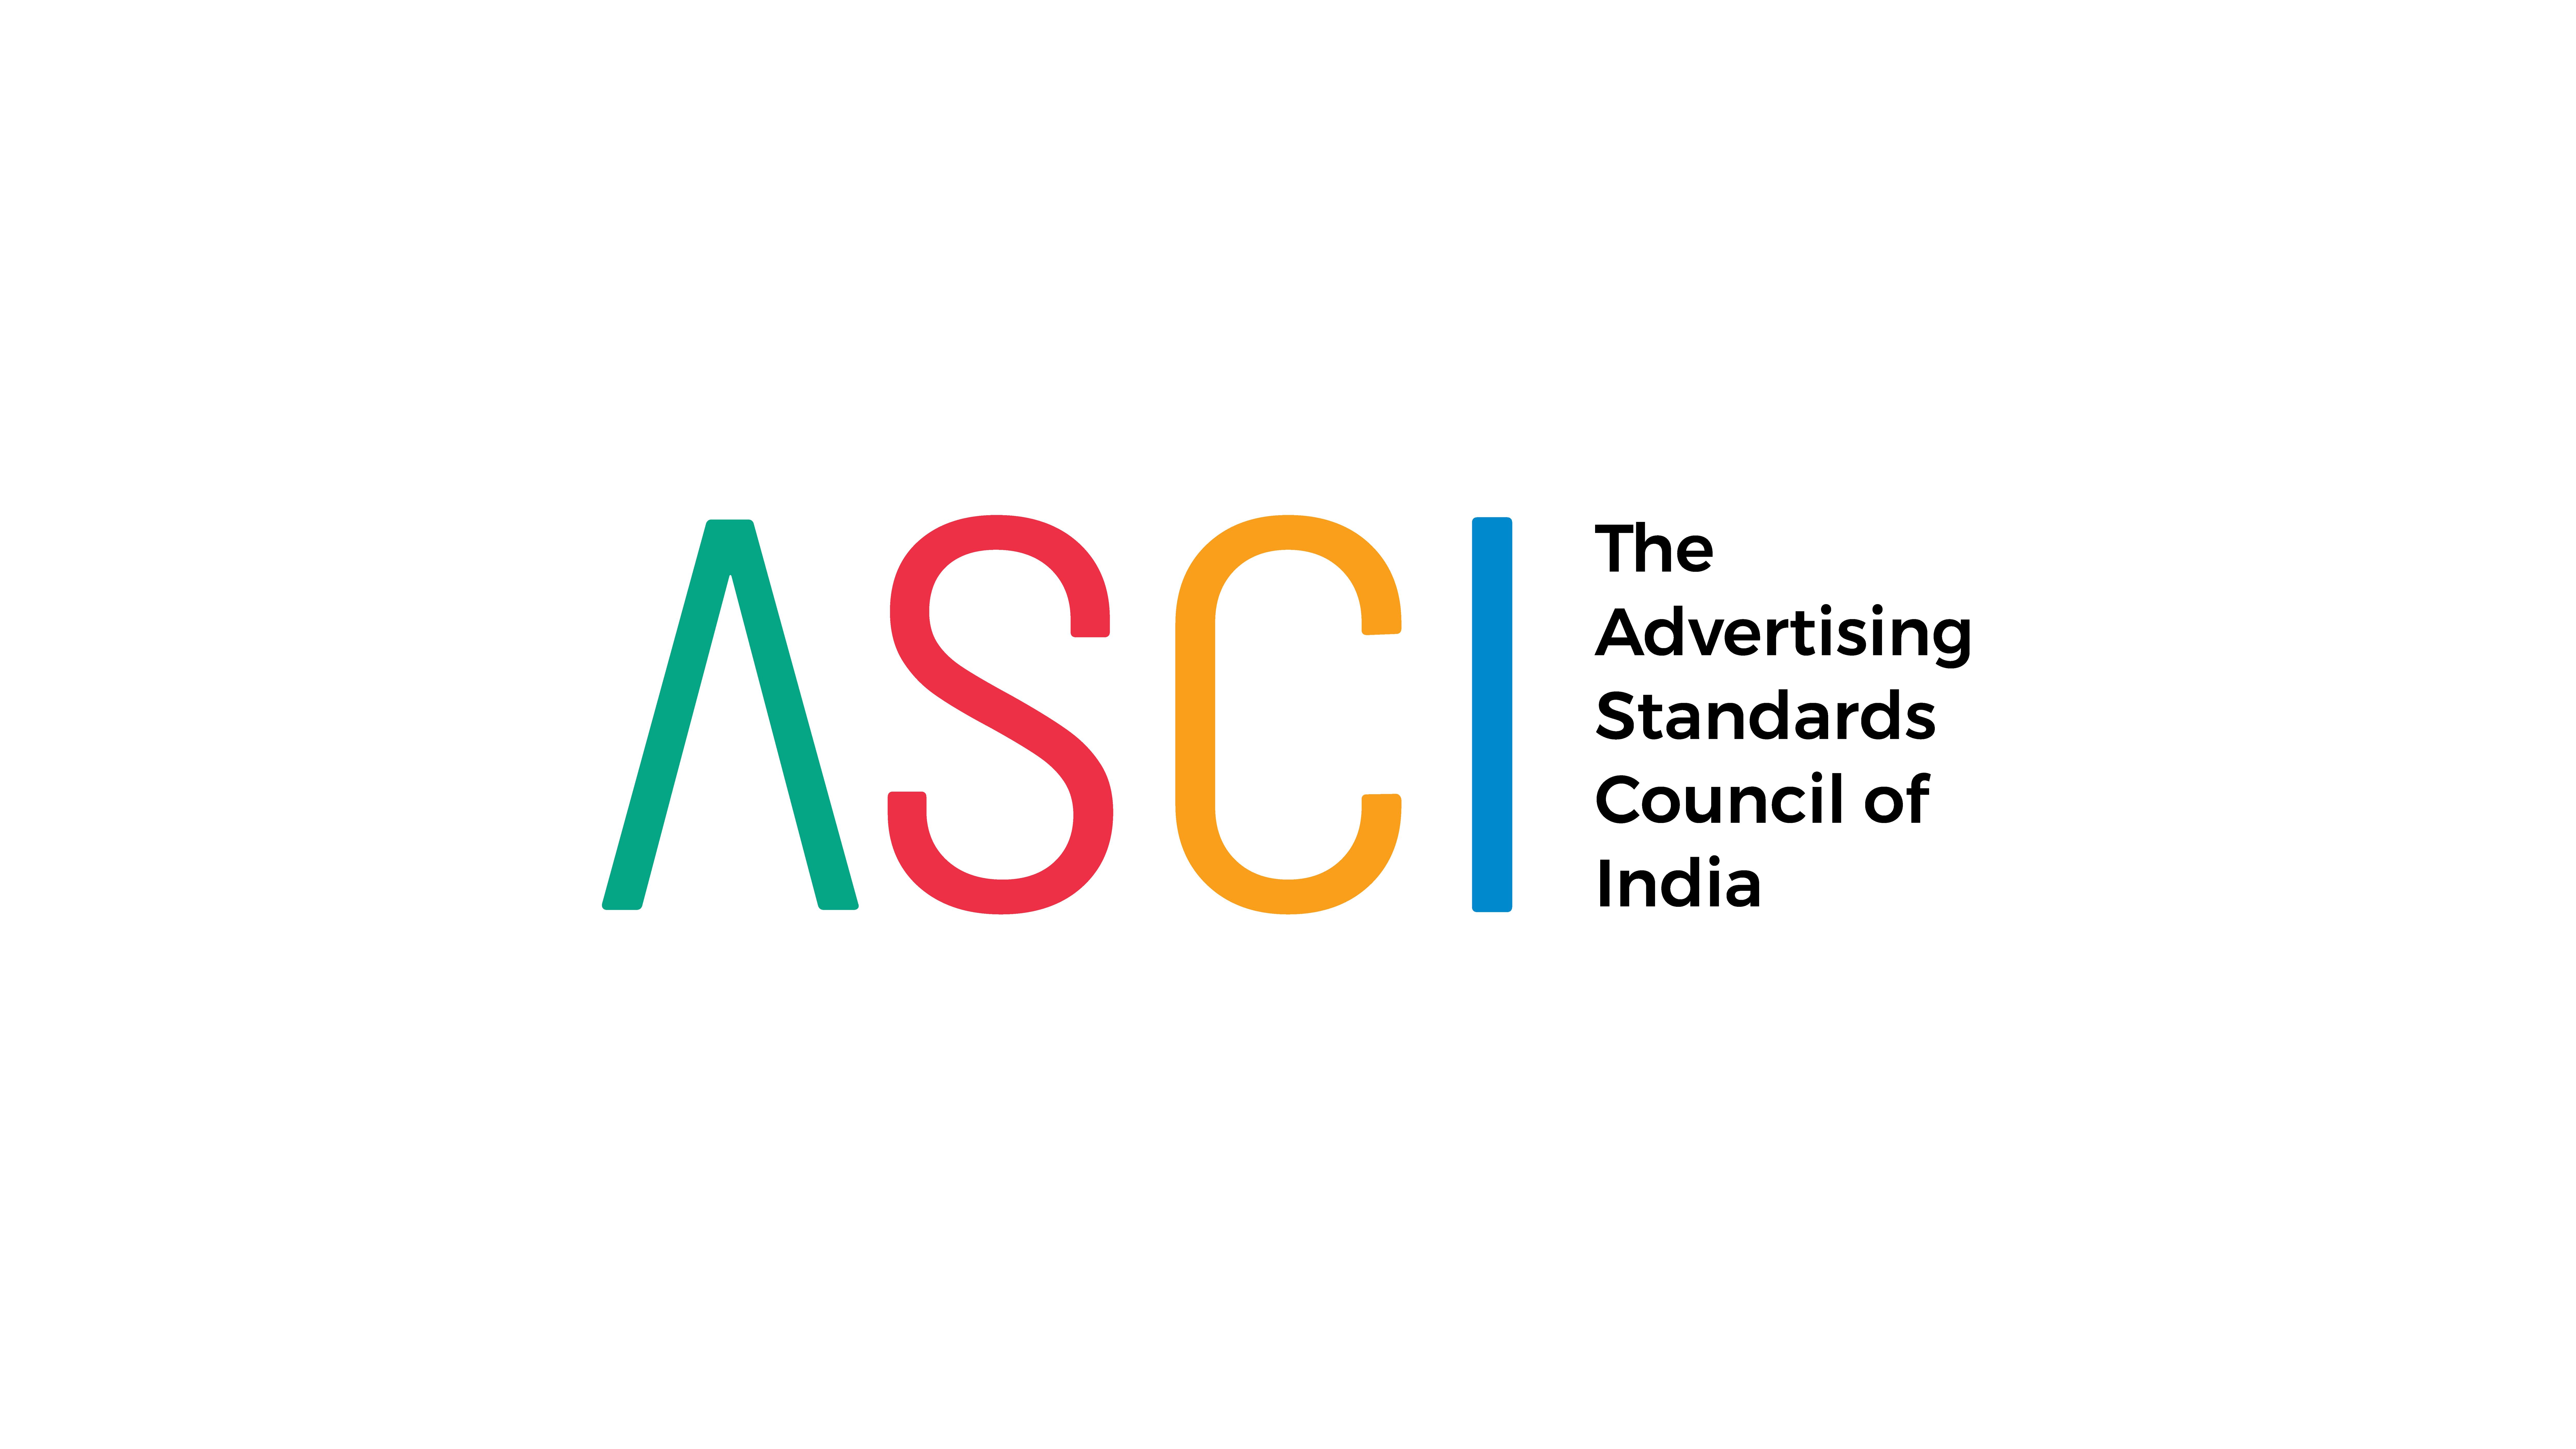 Multiple stakeholders come together to form ASCI Academy